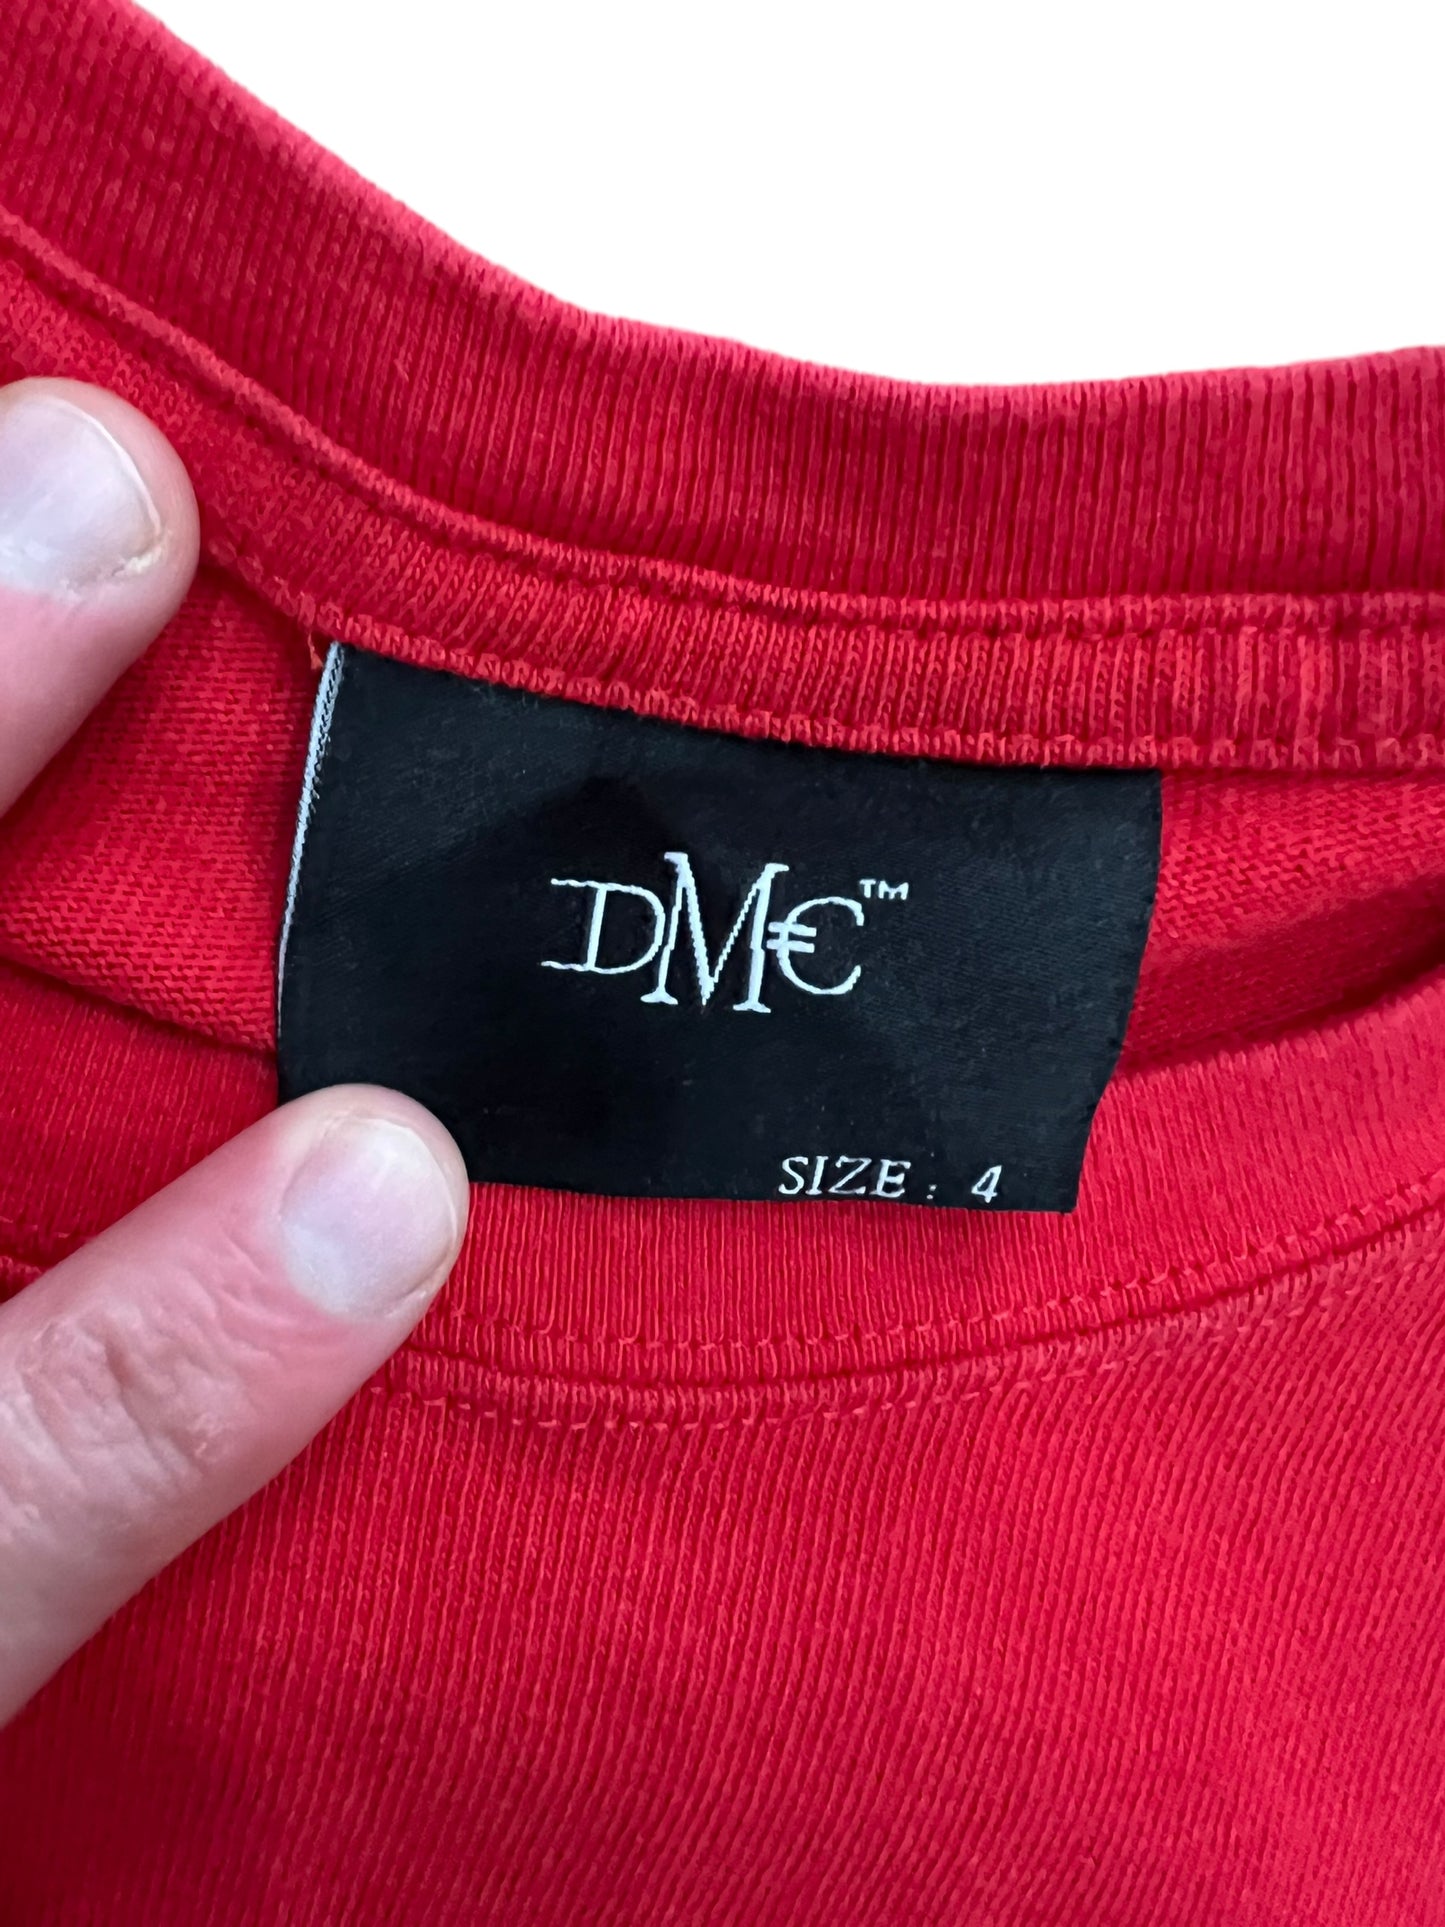 Marino Infantry X Needles pre-owned red tee size 4